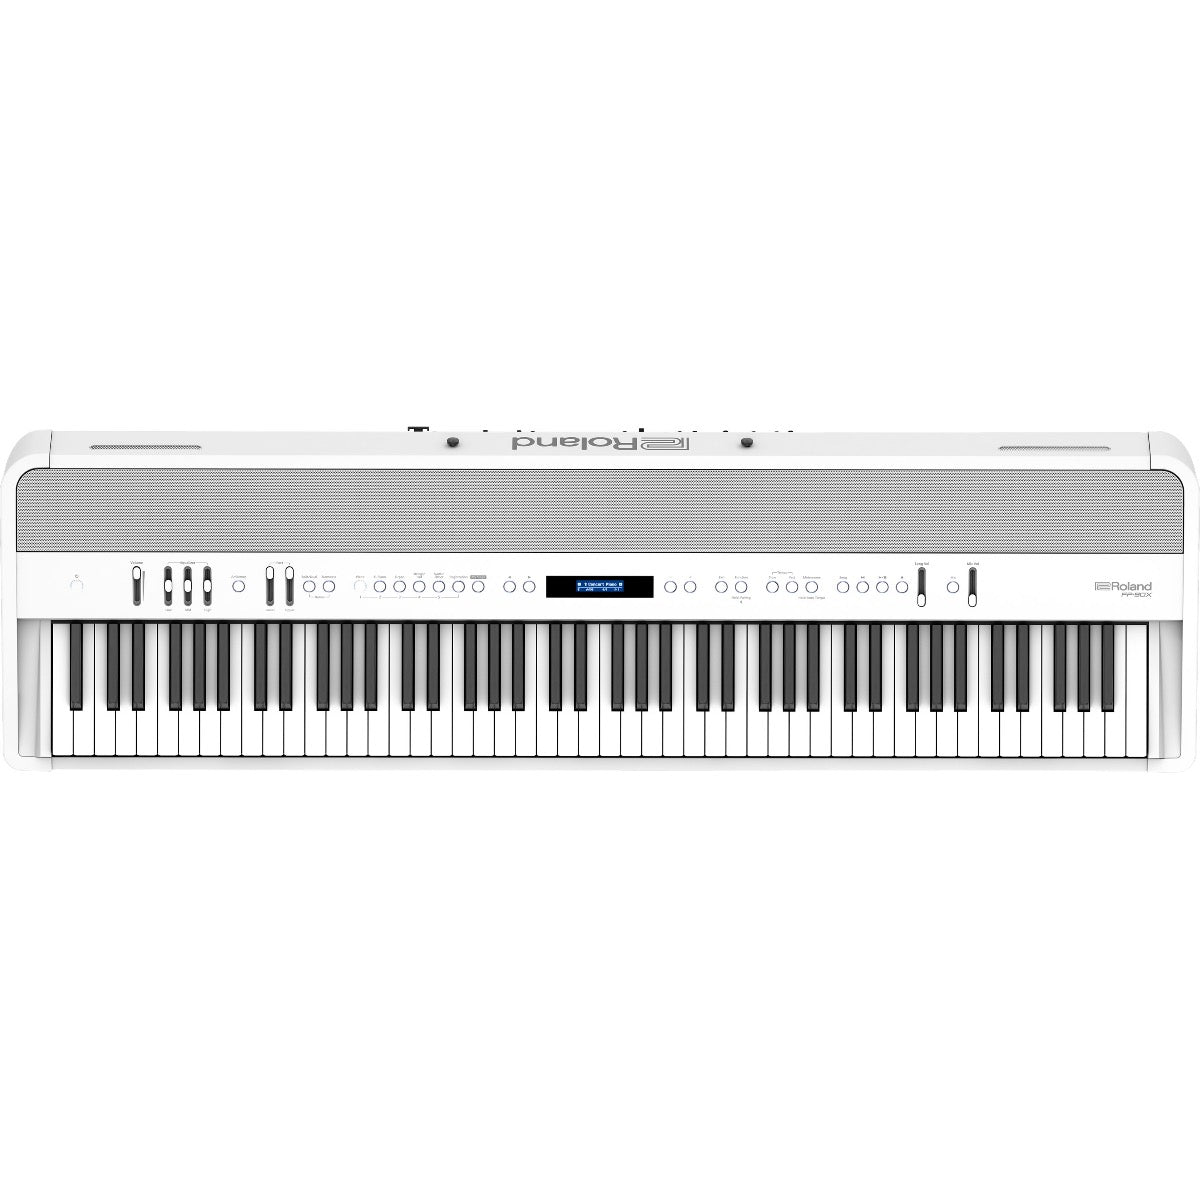 Top view of Roland FP-90X Digital Piano - White